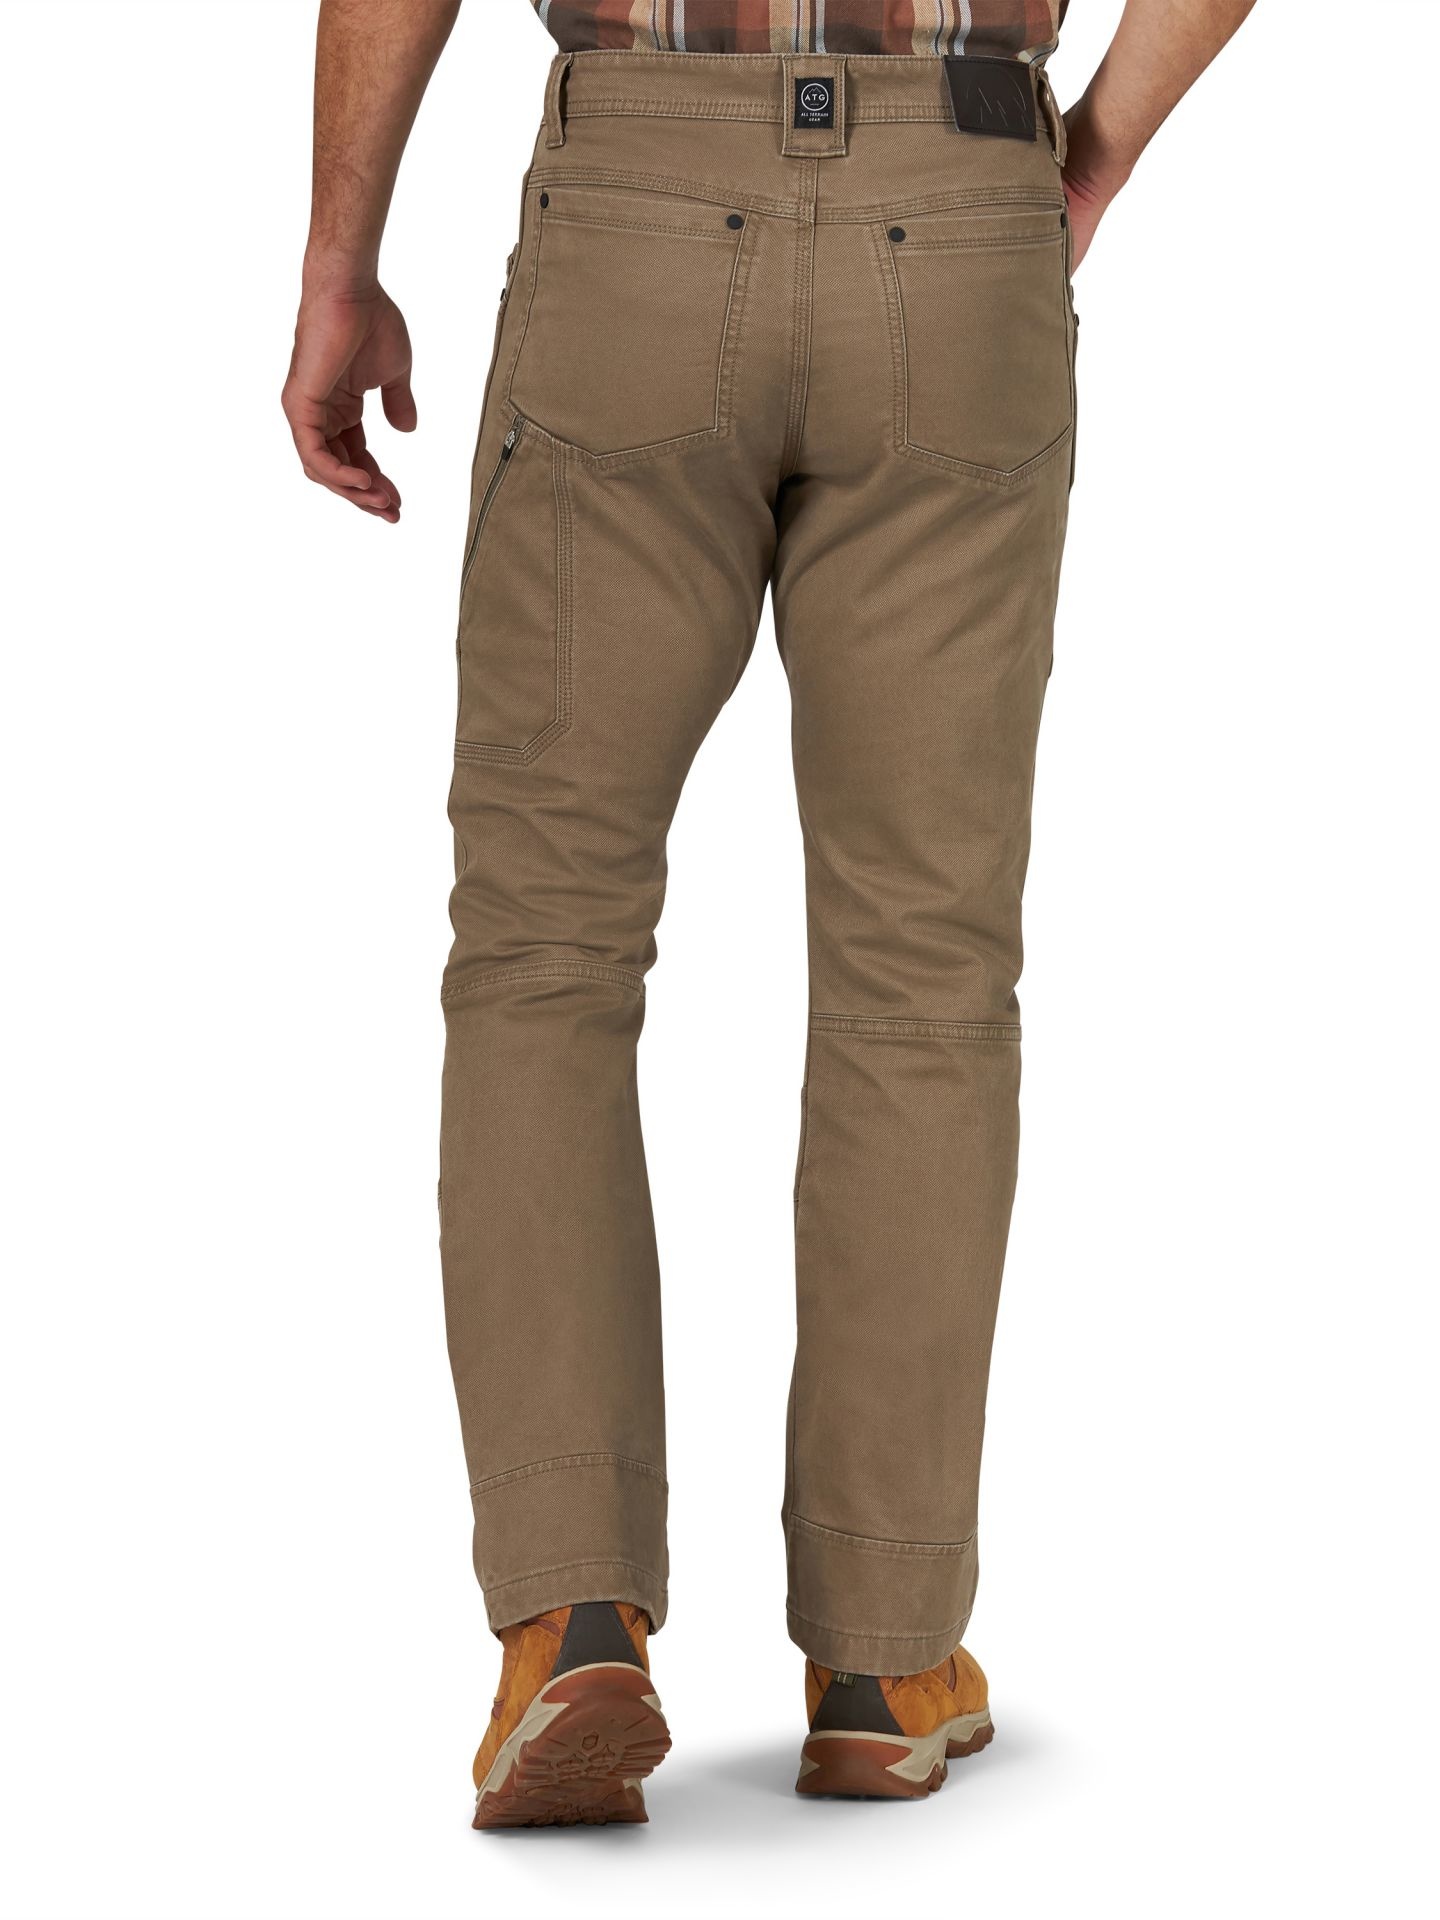 Wrangler Men's ATG Reinforced Utility Pant - Traditions Clothing & Gift ...